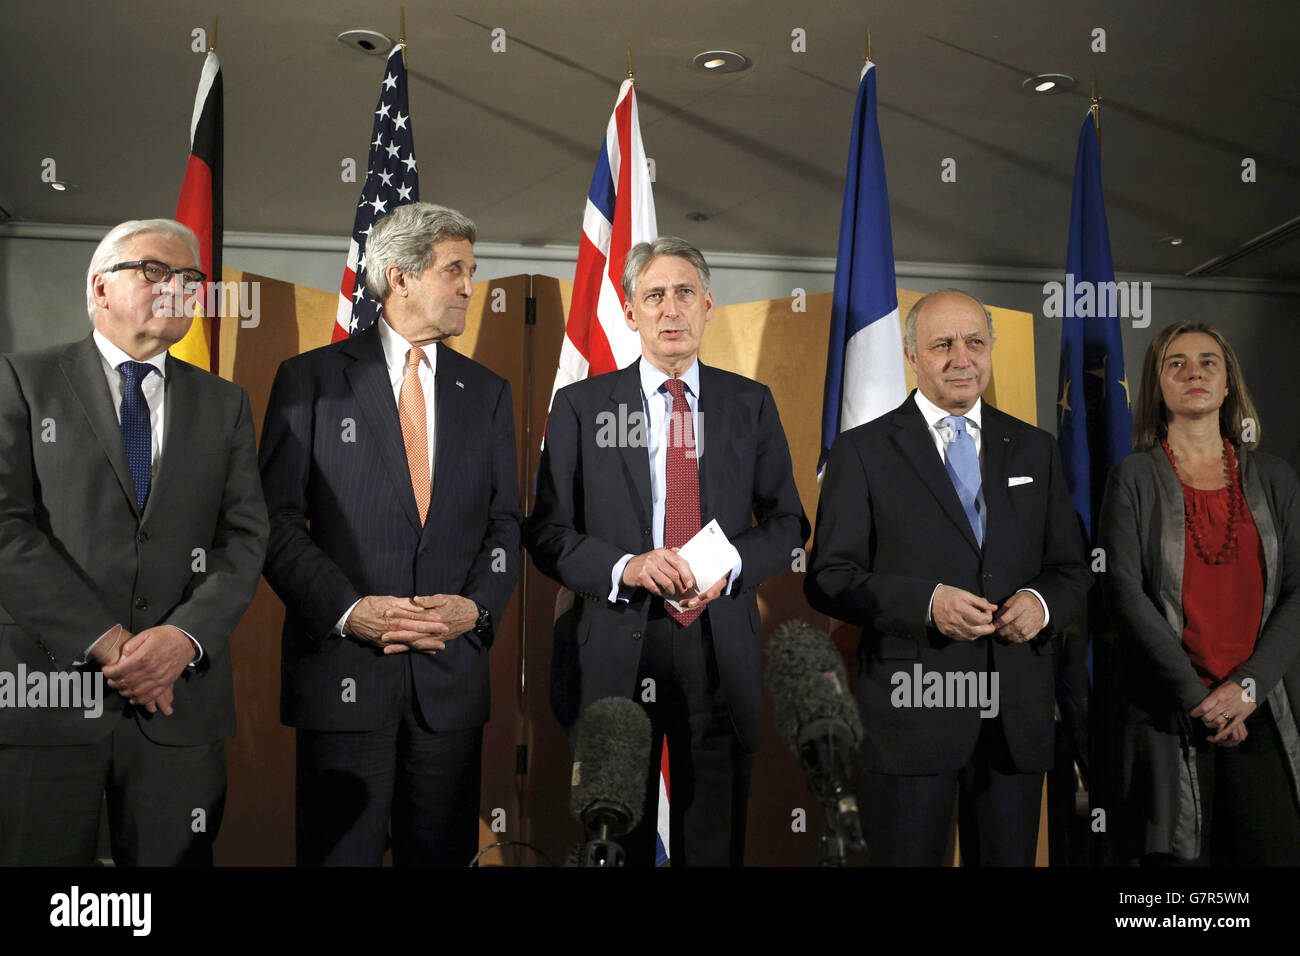 (left to right) Germany's Foreign Minister Frank-Walter Steinmeier, US Secretary of State John Kerry, Foreign Secretary Philip Hammond, French Foreign Minister Laurent Fabius and High Representative of the European Union for Foreign Affairs and Security Policy Federica Mogherini line up as Hammond reads a statement to waiting media following their talks at Heathrow Airport, London about the recently concluded round of negotiations with Iran over their nuclear program. Stock Photo